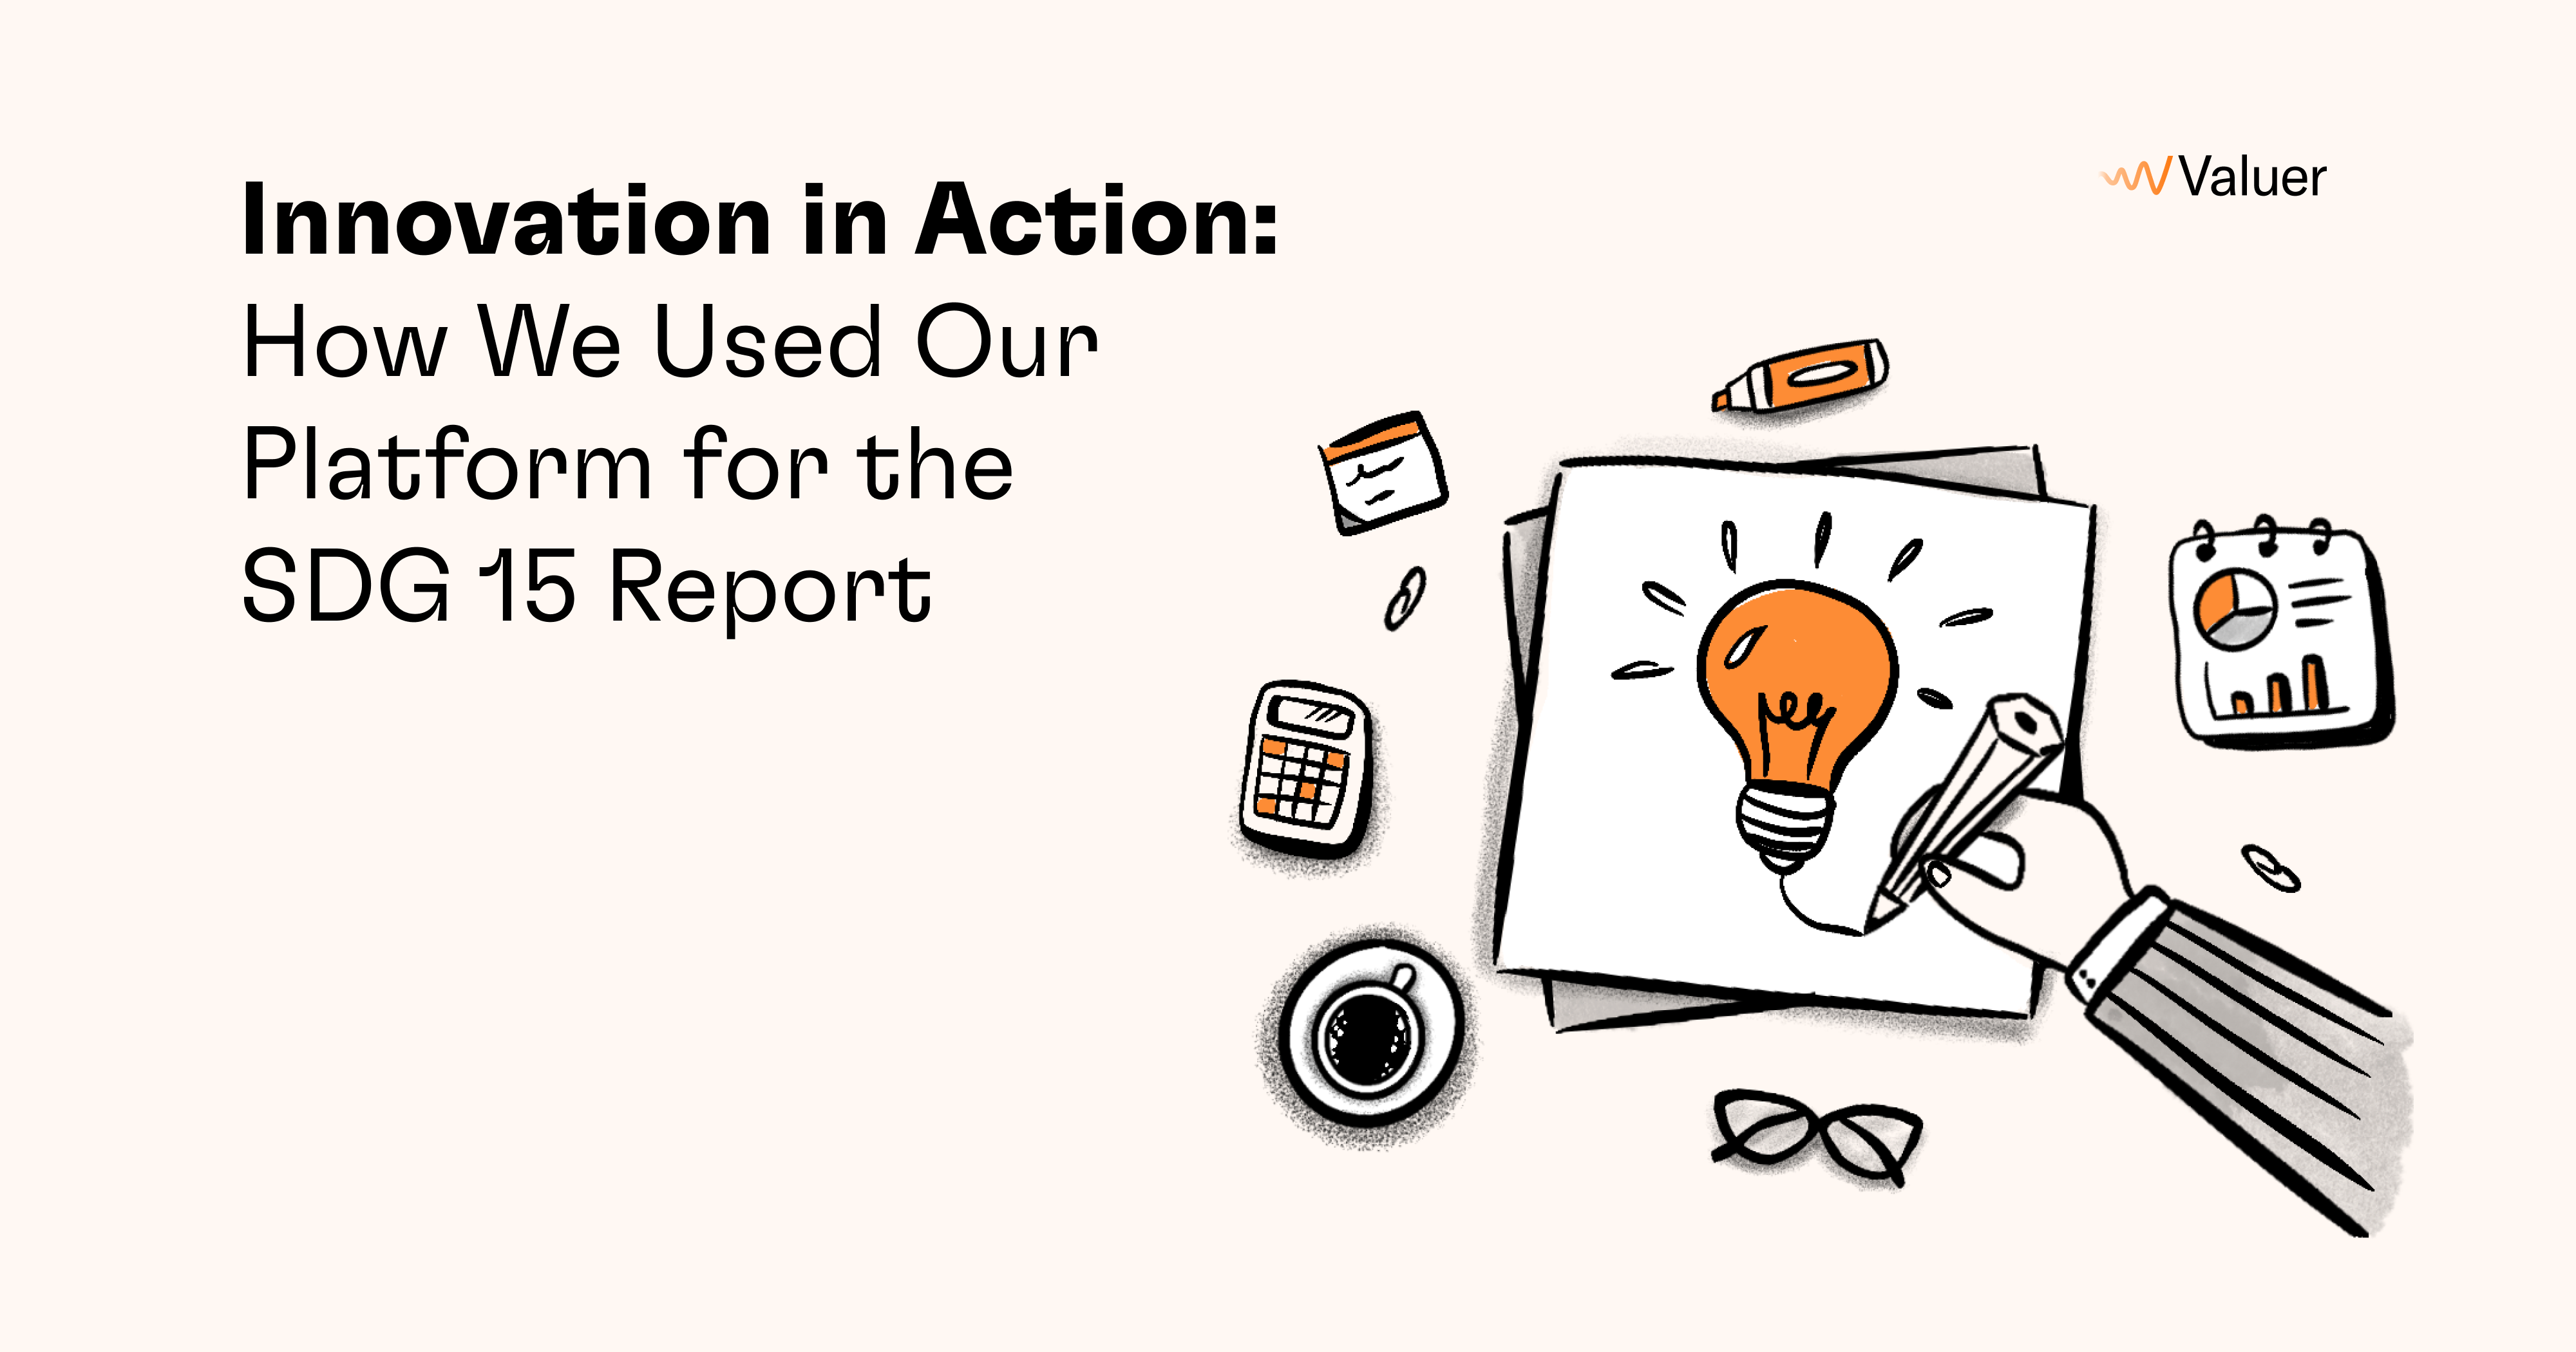 Innovation in Action: How We Used Our Platform for the SDG 15 Report